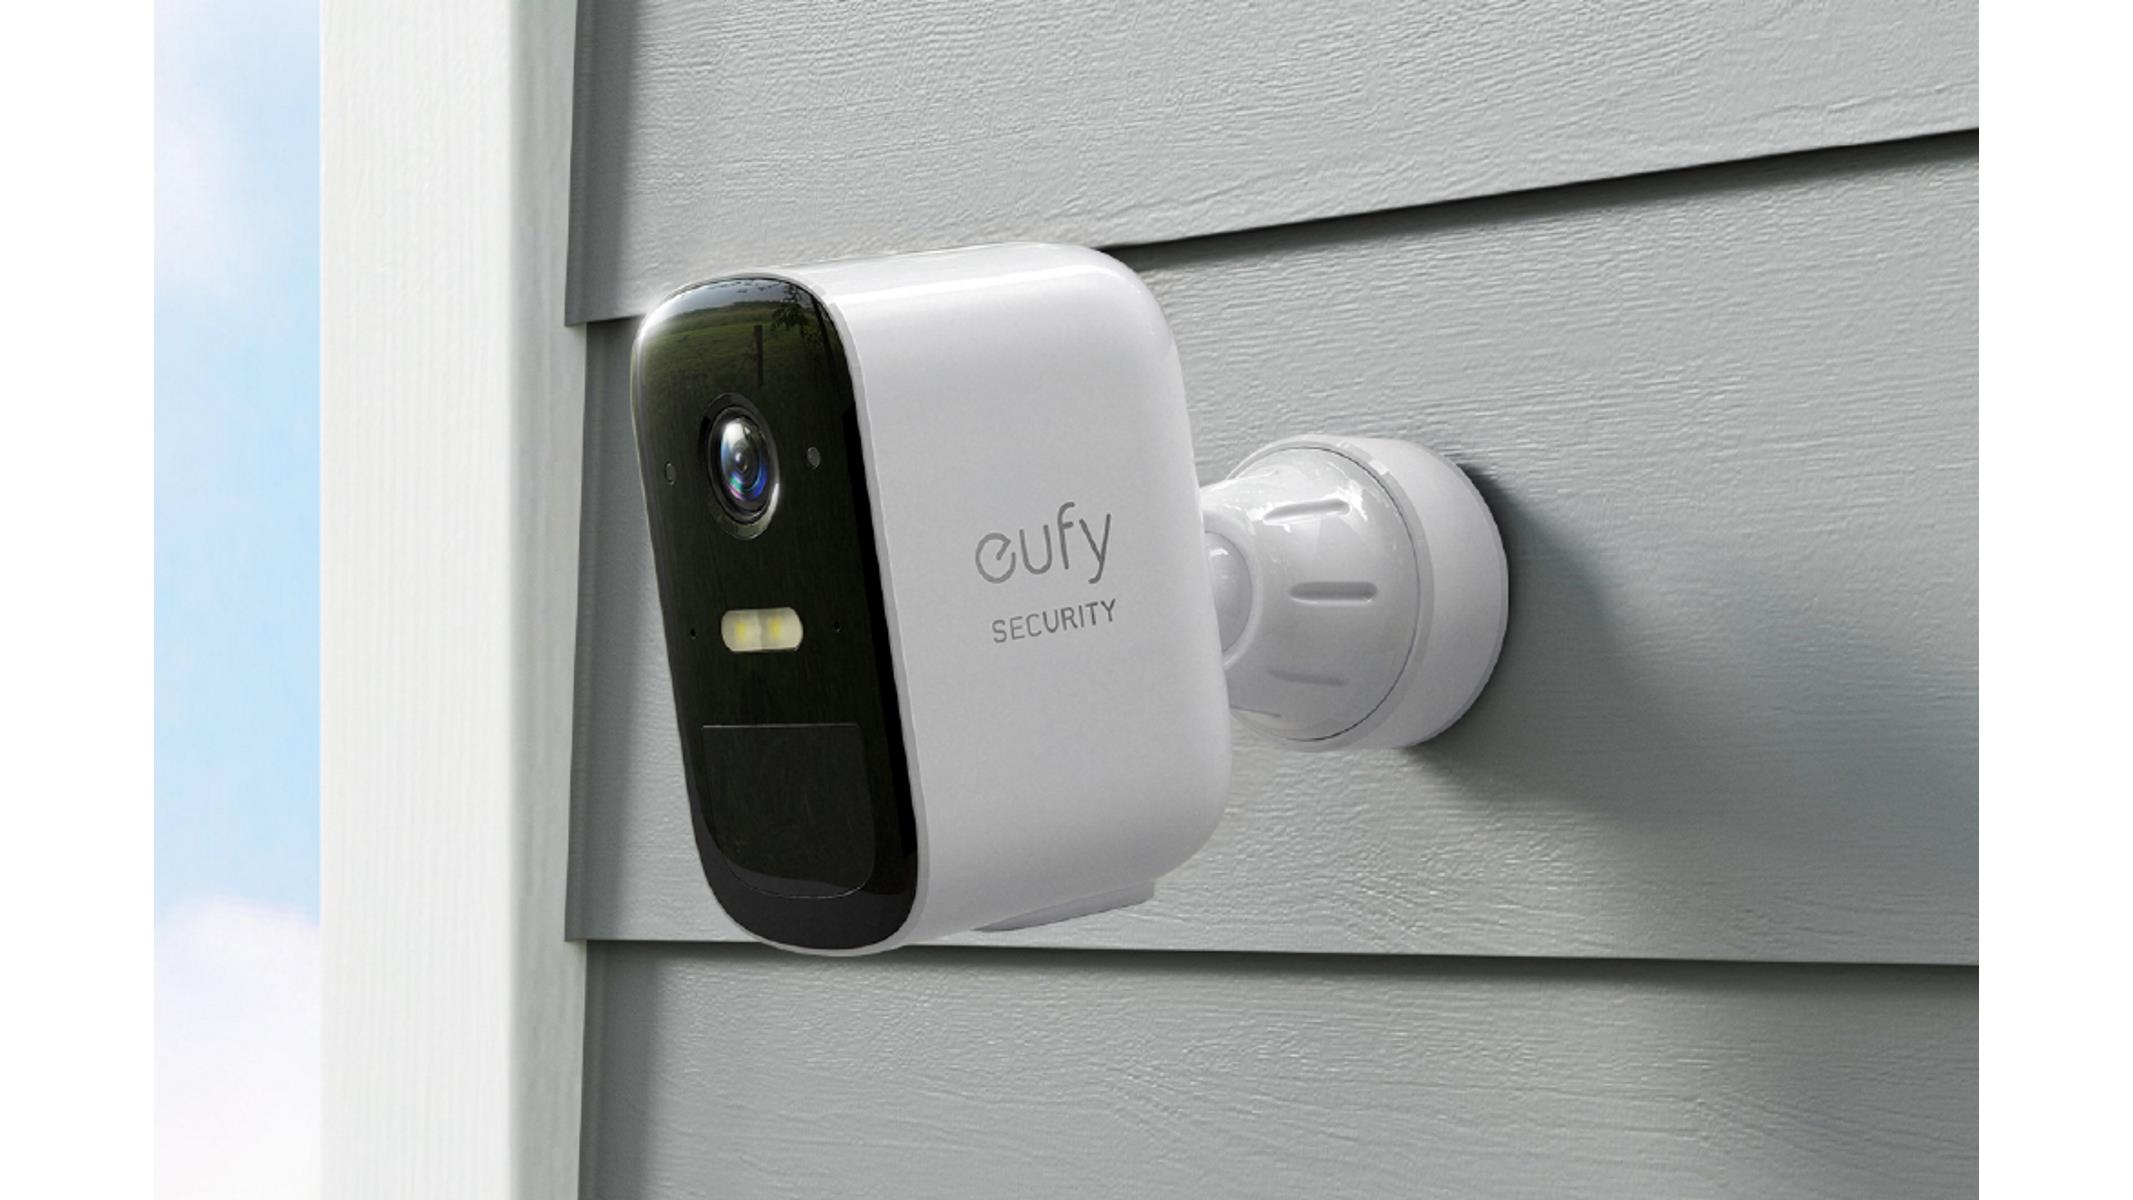 Eufy security cameras suddenly start showing live feeds to strangers